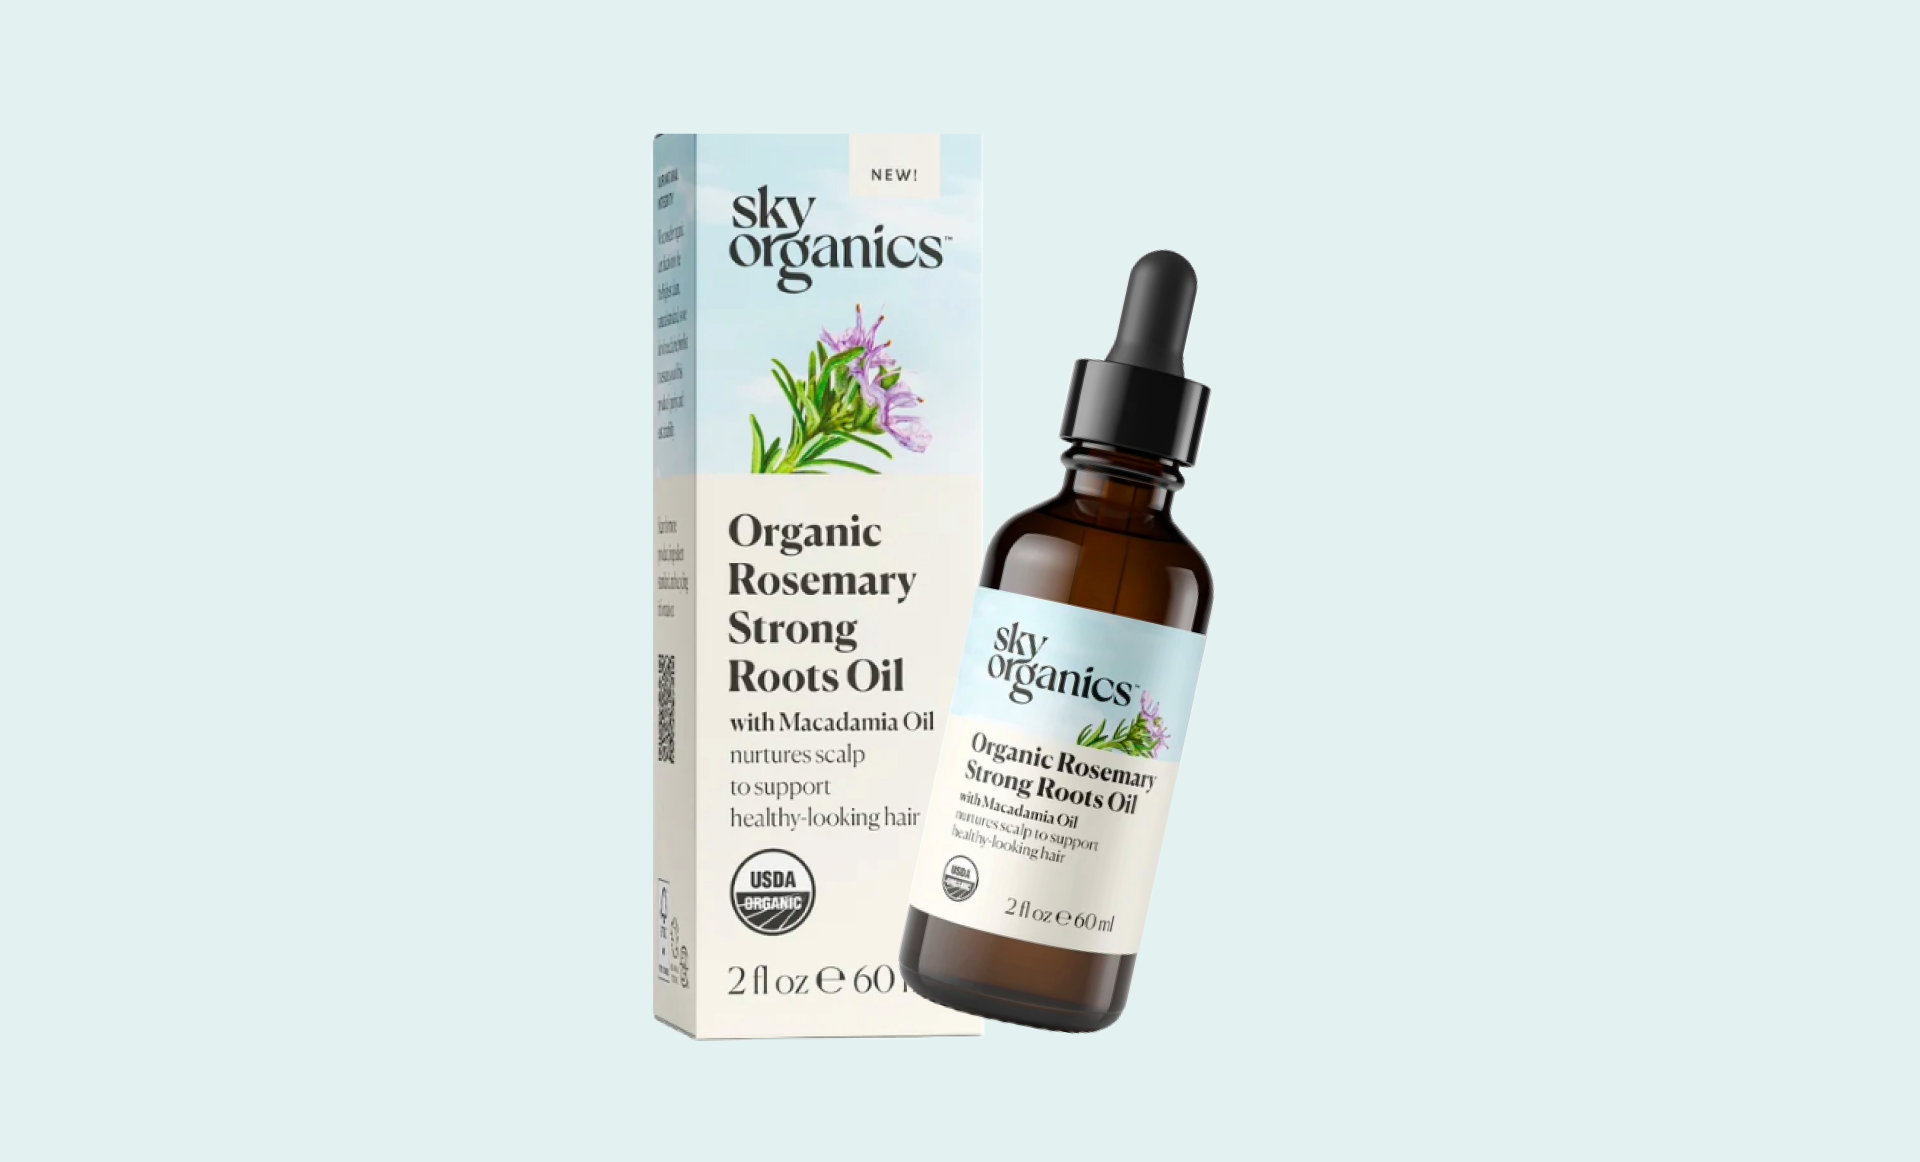 Sky organics rosemary strong roots oil